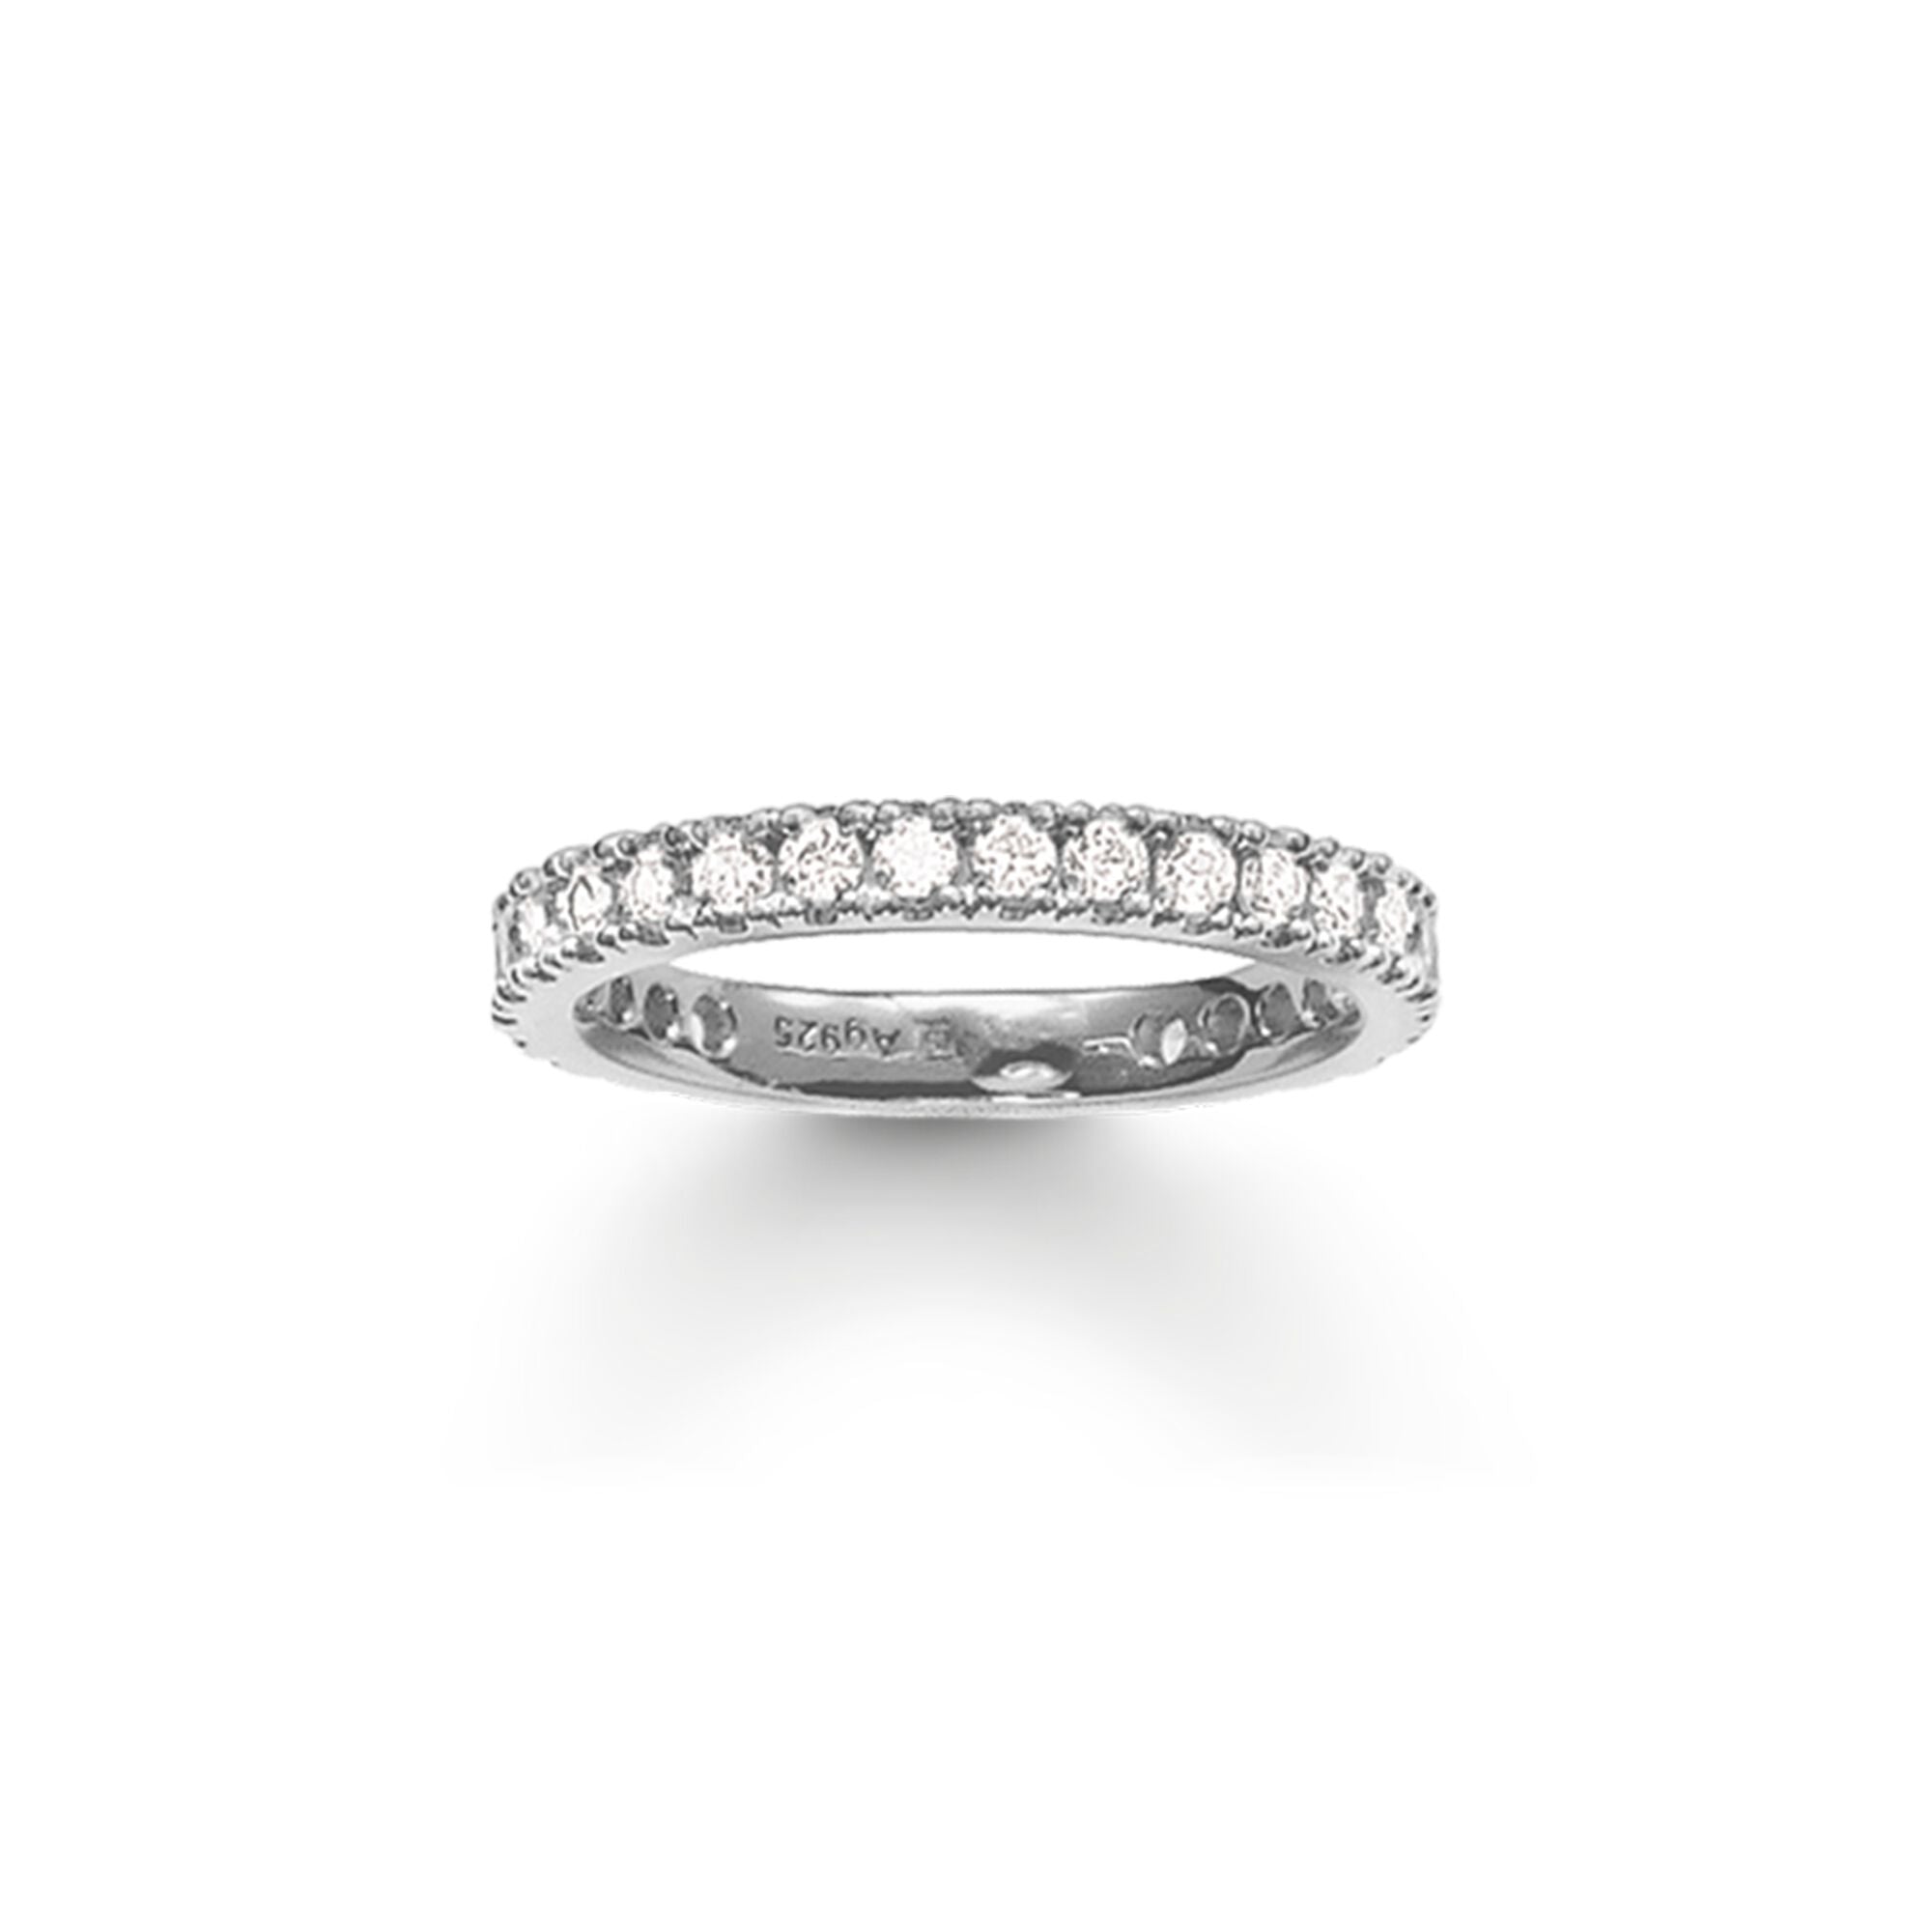 Thomas Sabo Sterling Silver White CZ Pave Eternity Ring D